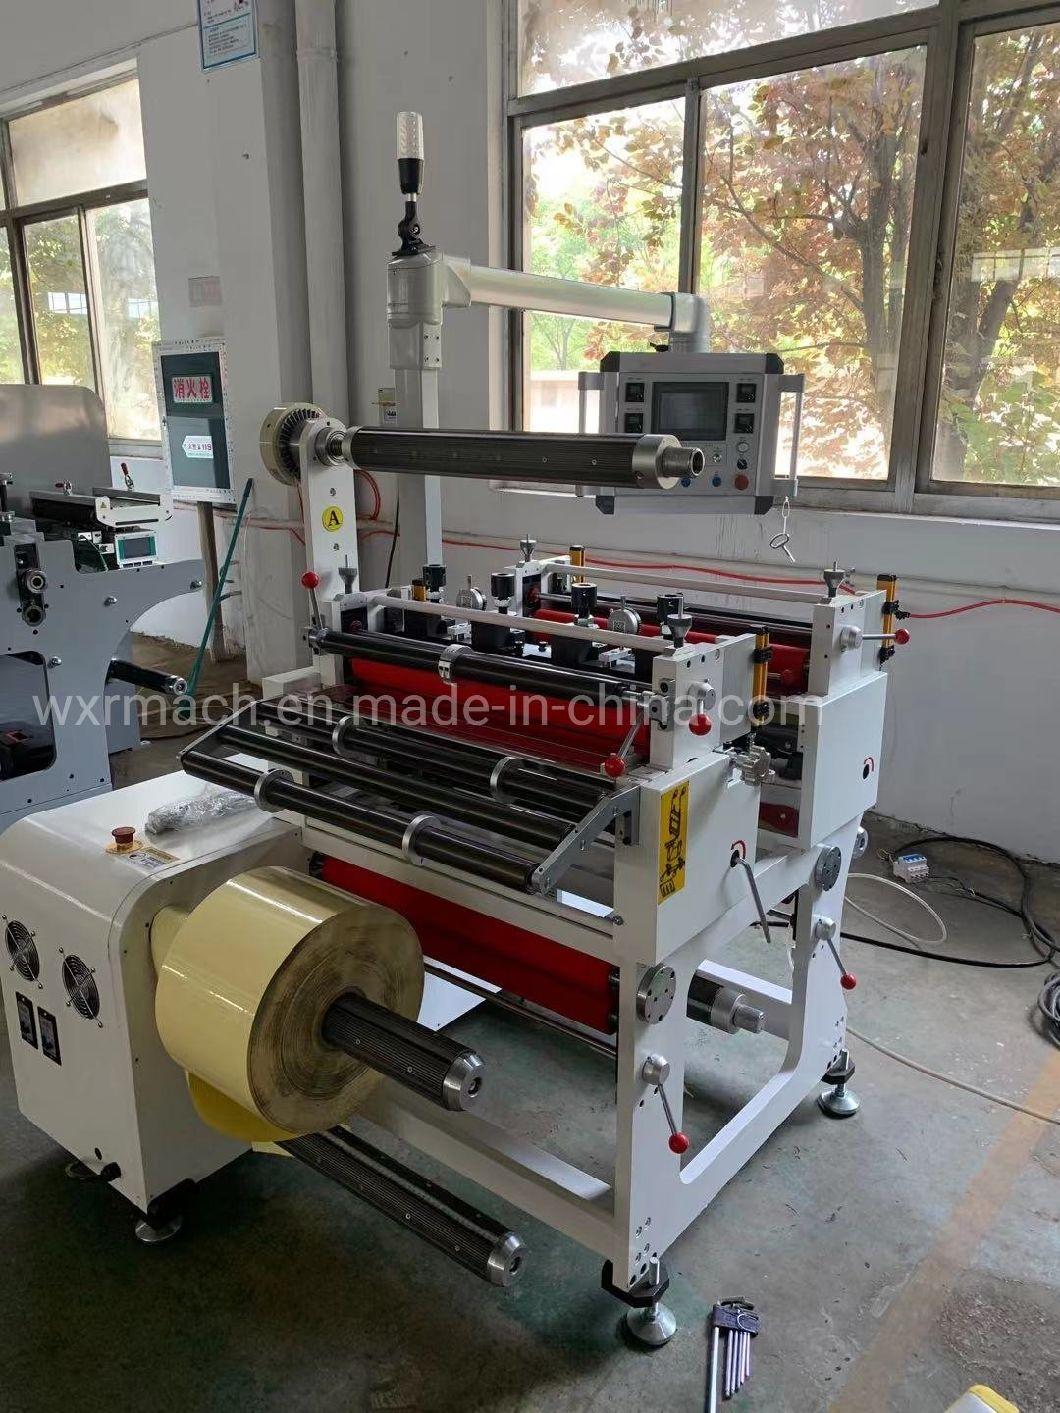 Nitto/Tesa Tape Intermittent Cutting Machine Directly Supplier in China